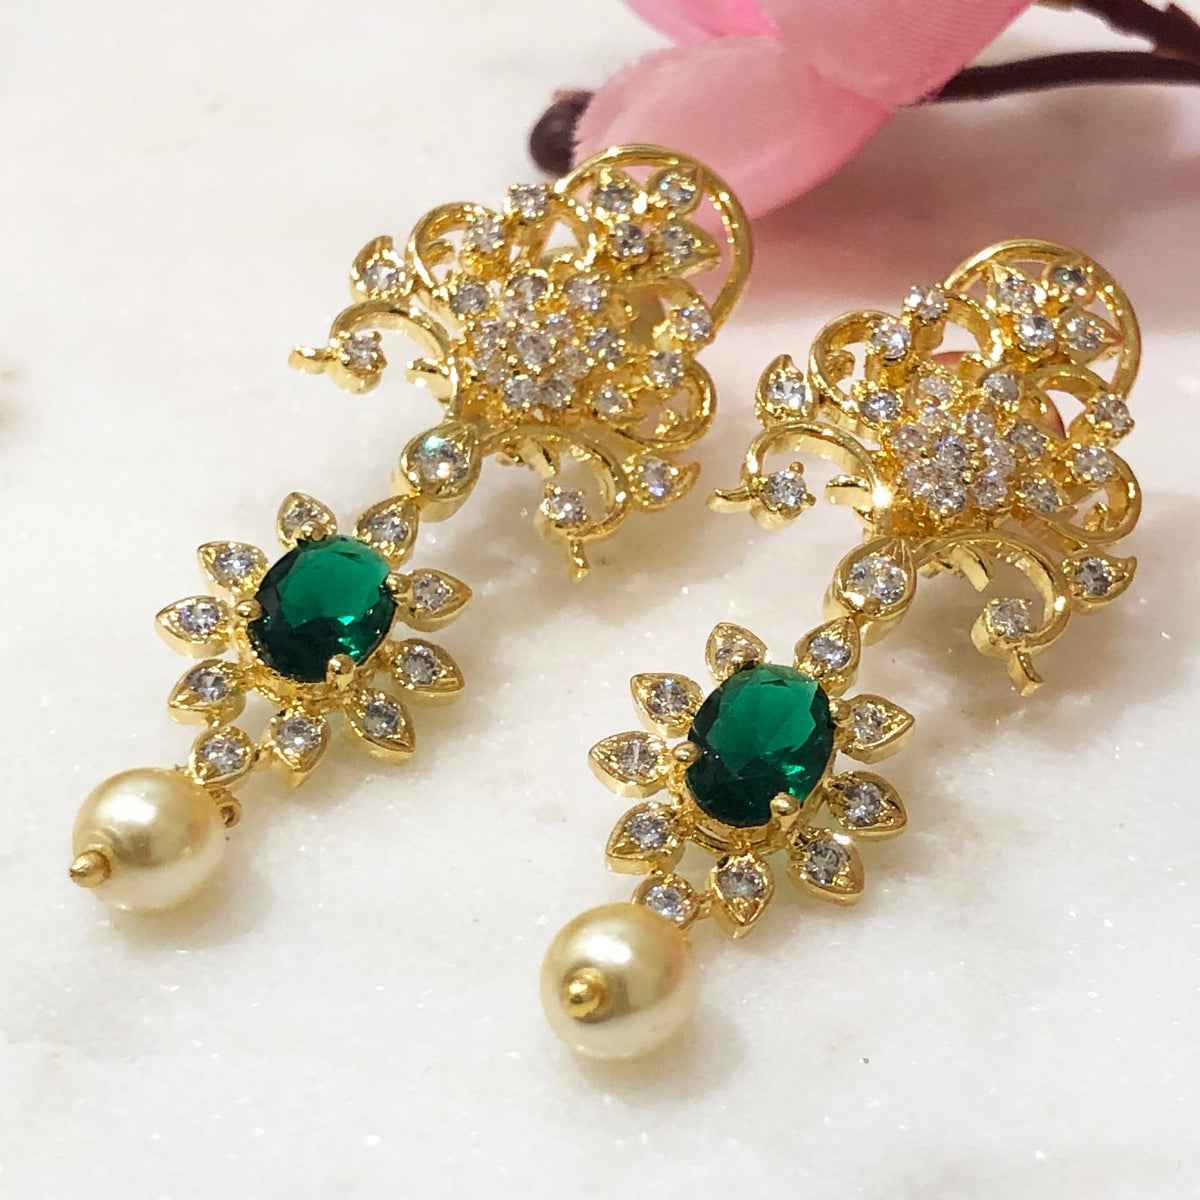 Daily wear small gold earrings design for girls - Simple Craft Idea